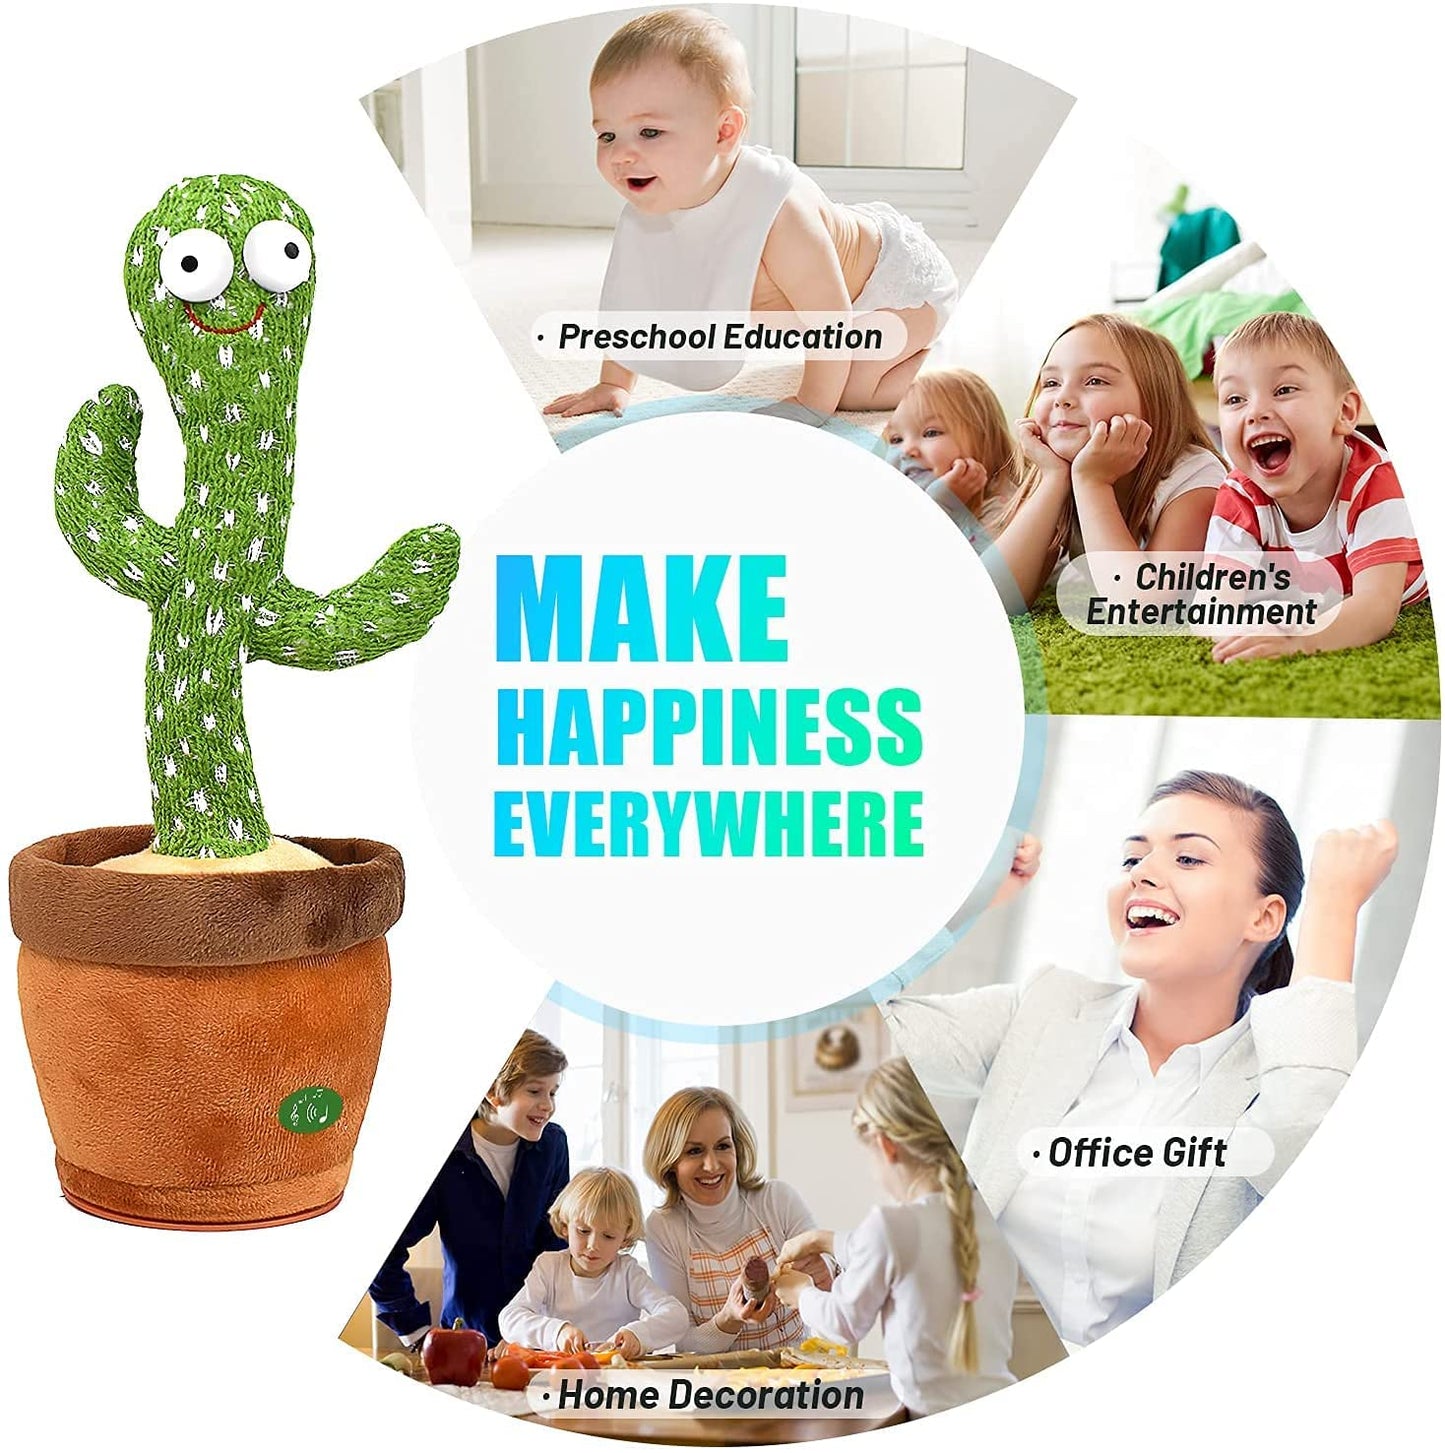 360 Dancing Cactus Toy - Homely Arts